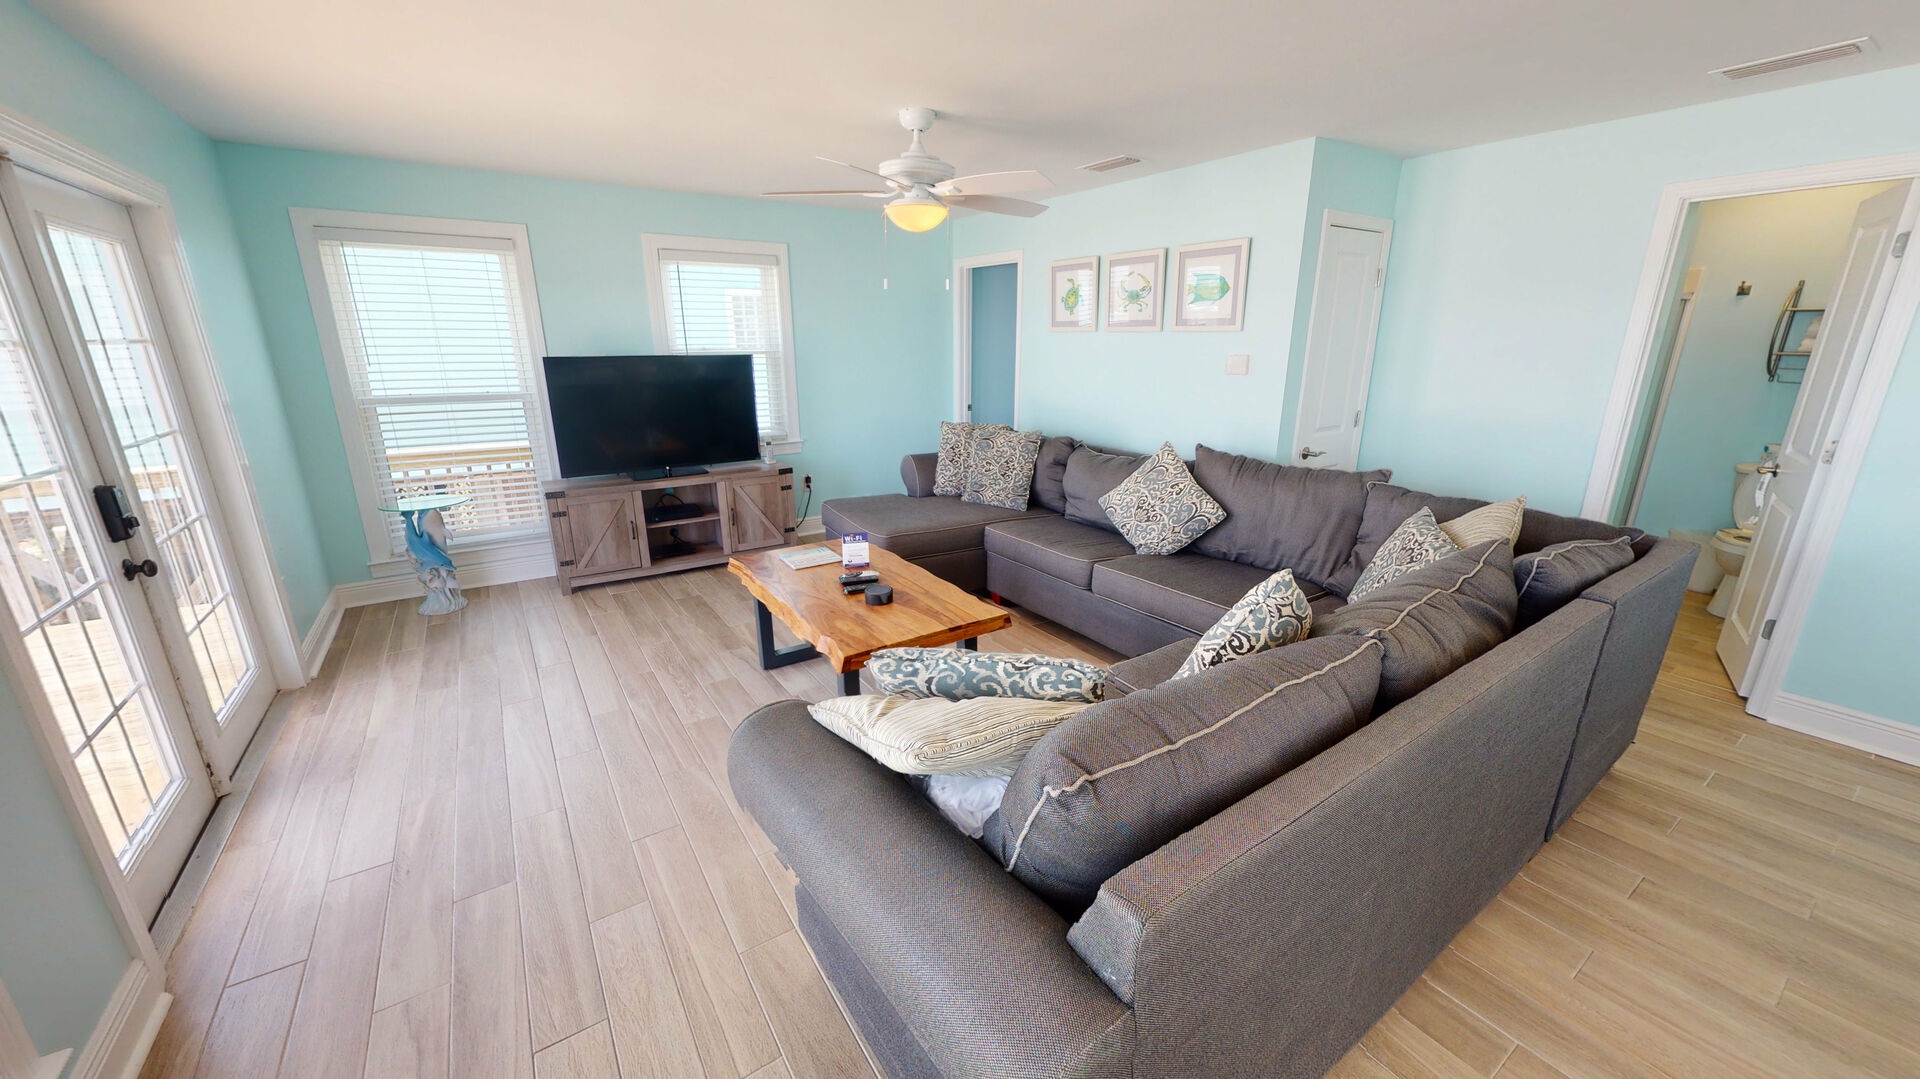 Living area features a large sectional that also doubles as a sofa sleeper for 2, TV, and access to the beach front deck